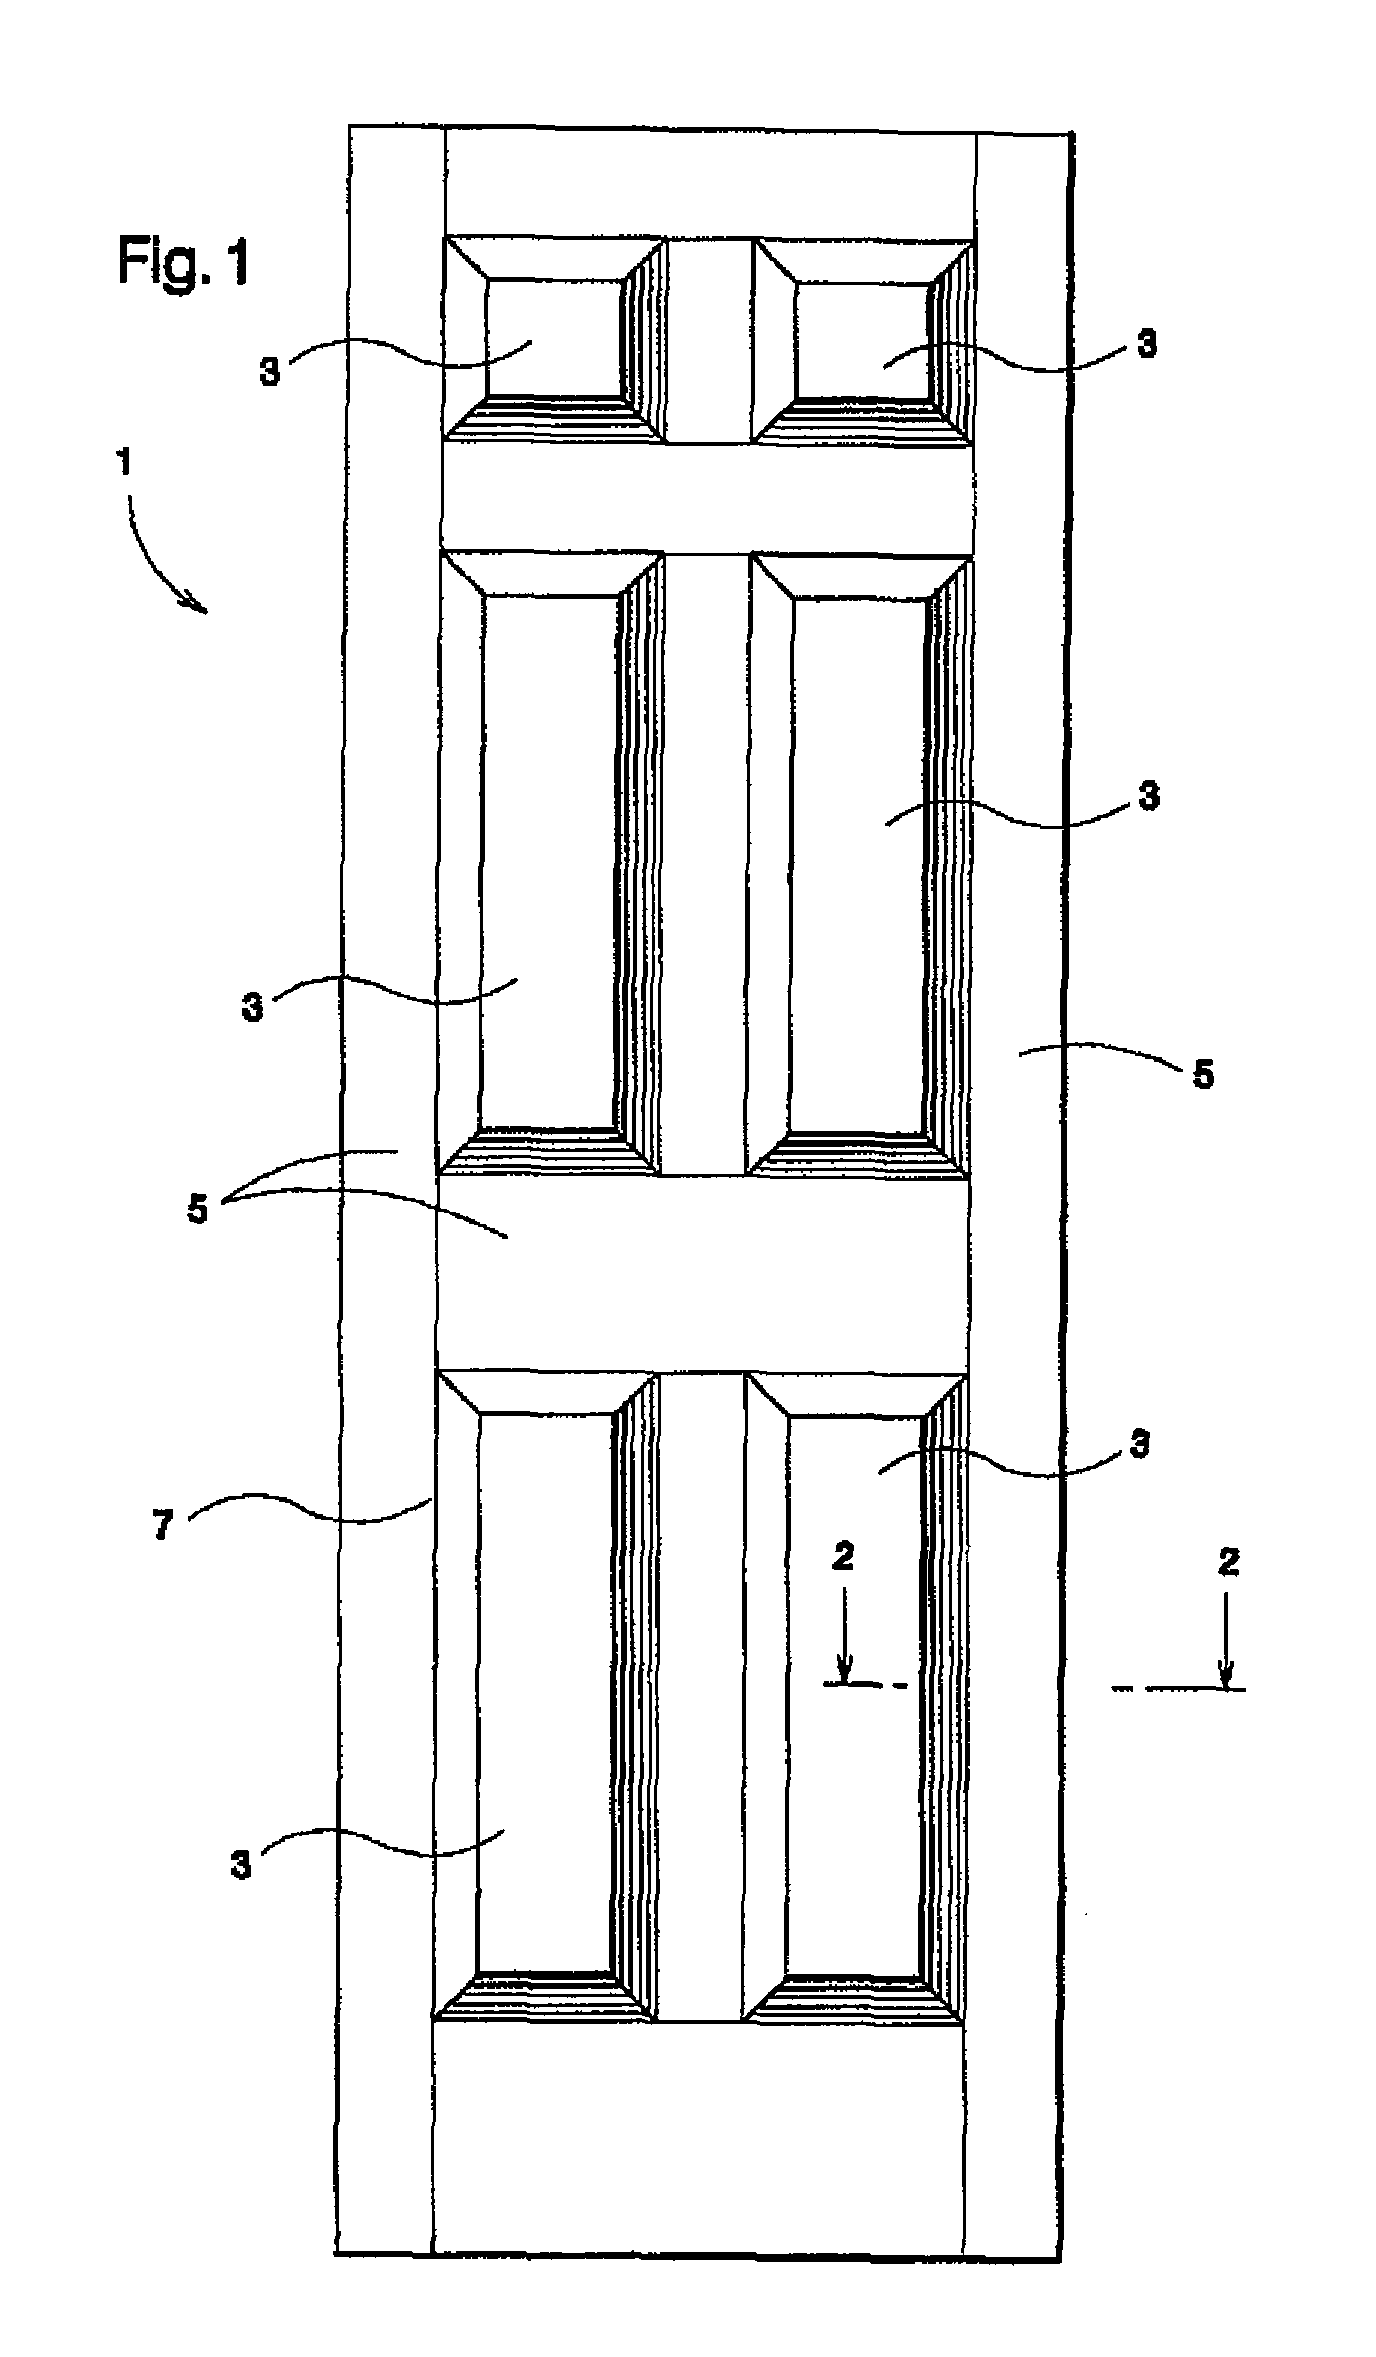 Impact resistant door skin, door including the same, and method of manufacturing an impact resistant door skin from a pre-formed door skin